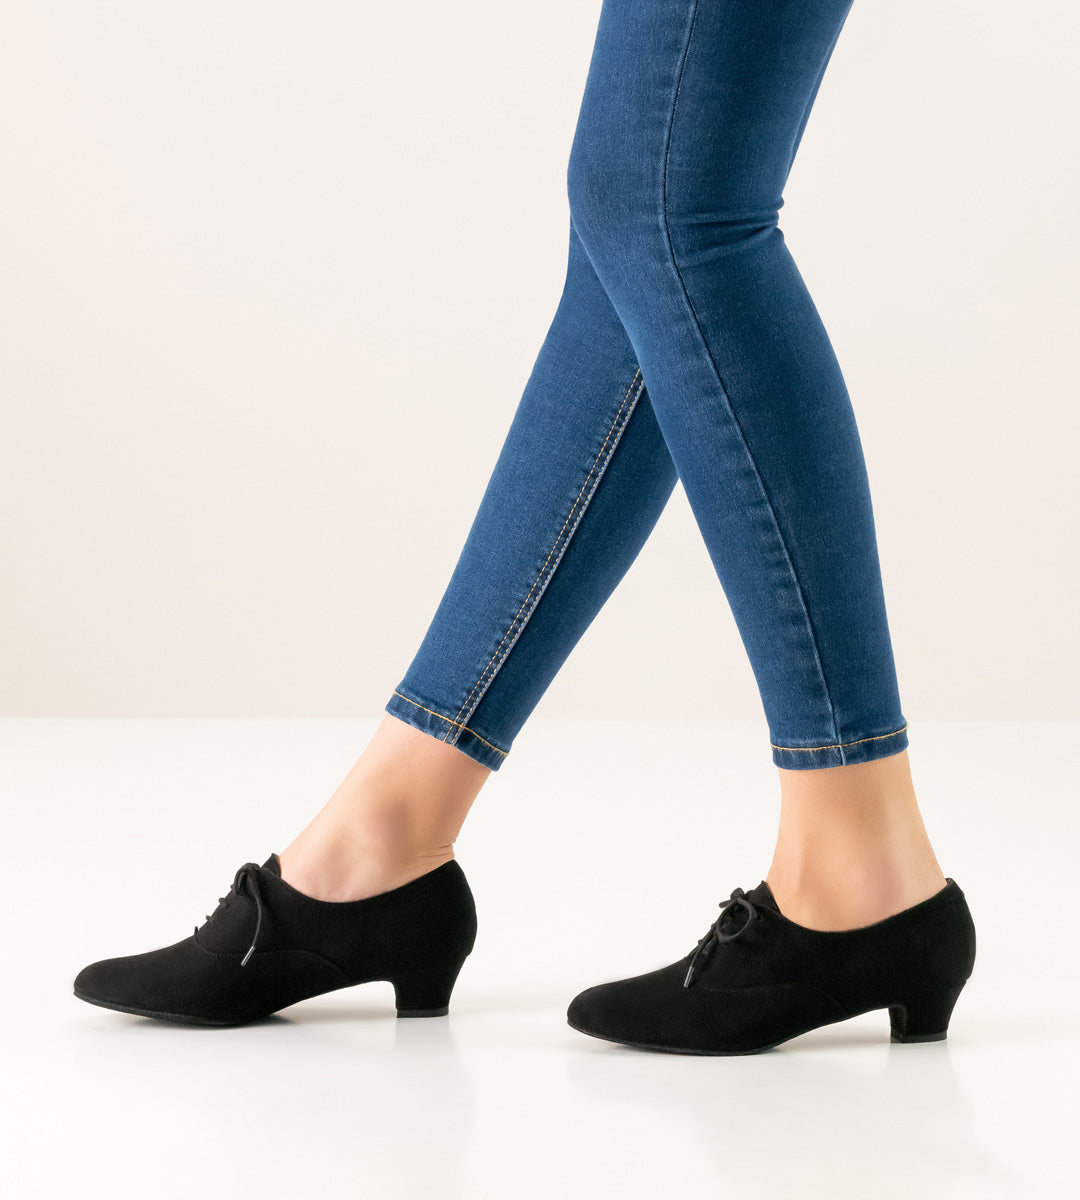 Ladies Practice Dance Shoes in Black Suede with a variety of Heel Heights